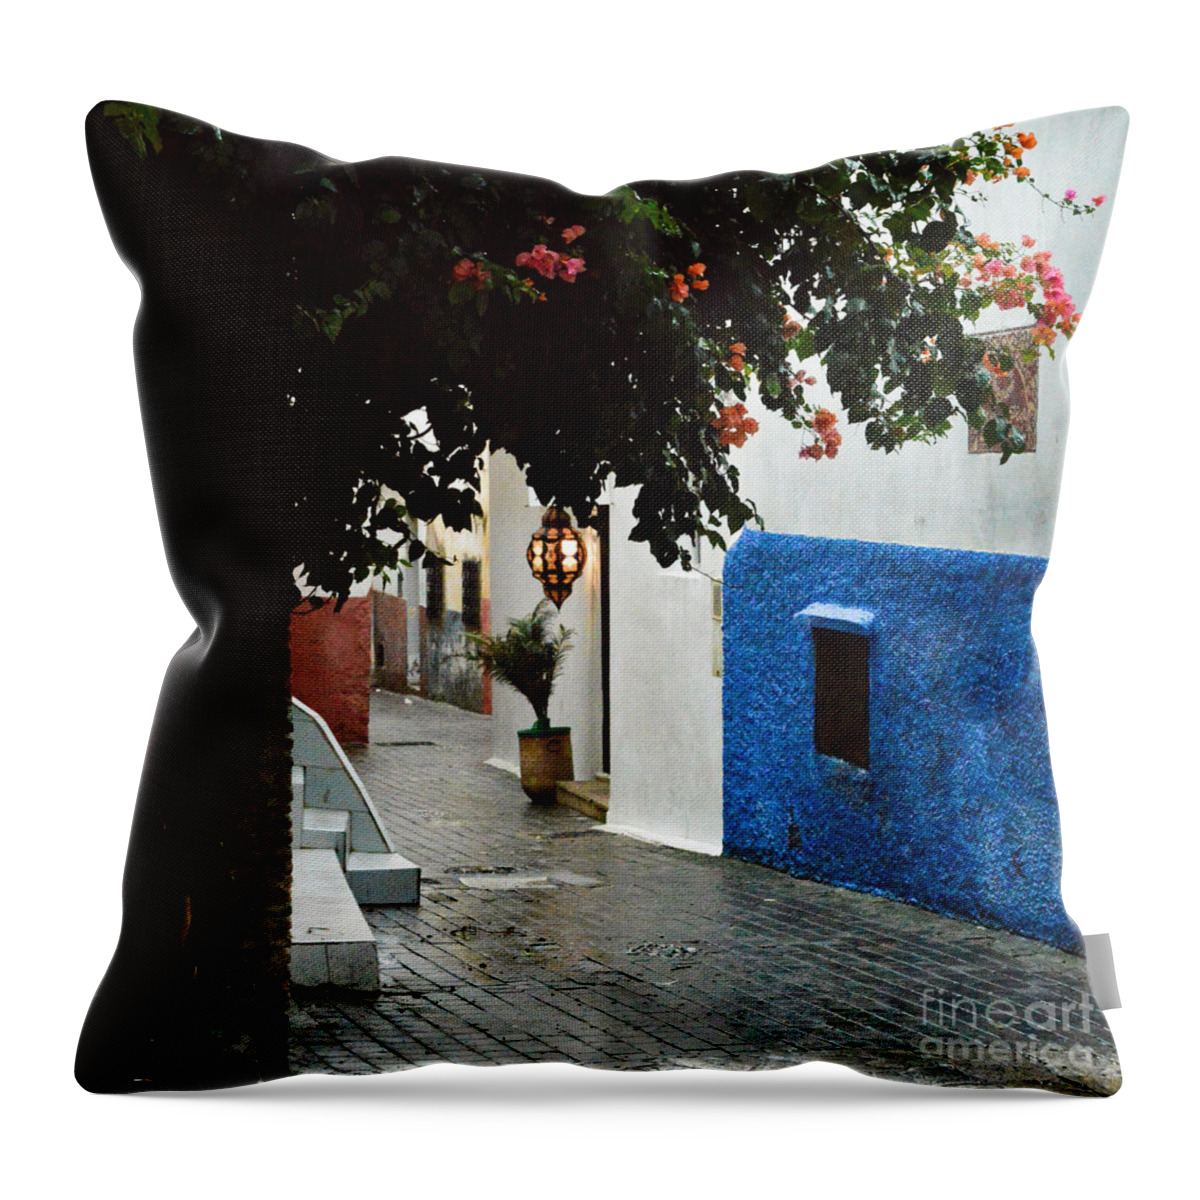 Tangier Throw Pillow featuring the photograph The streets of Tangier by Yavor Mihaylov